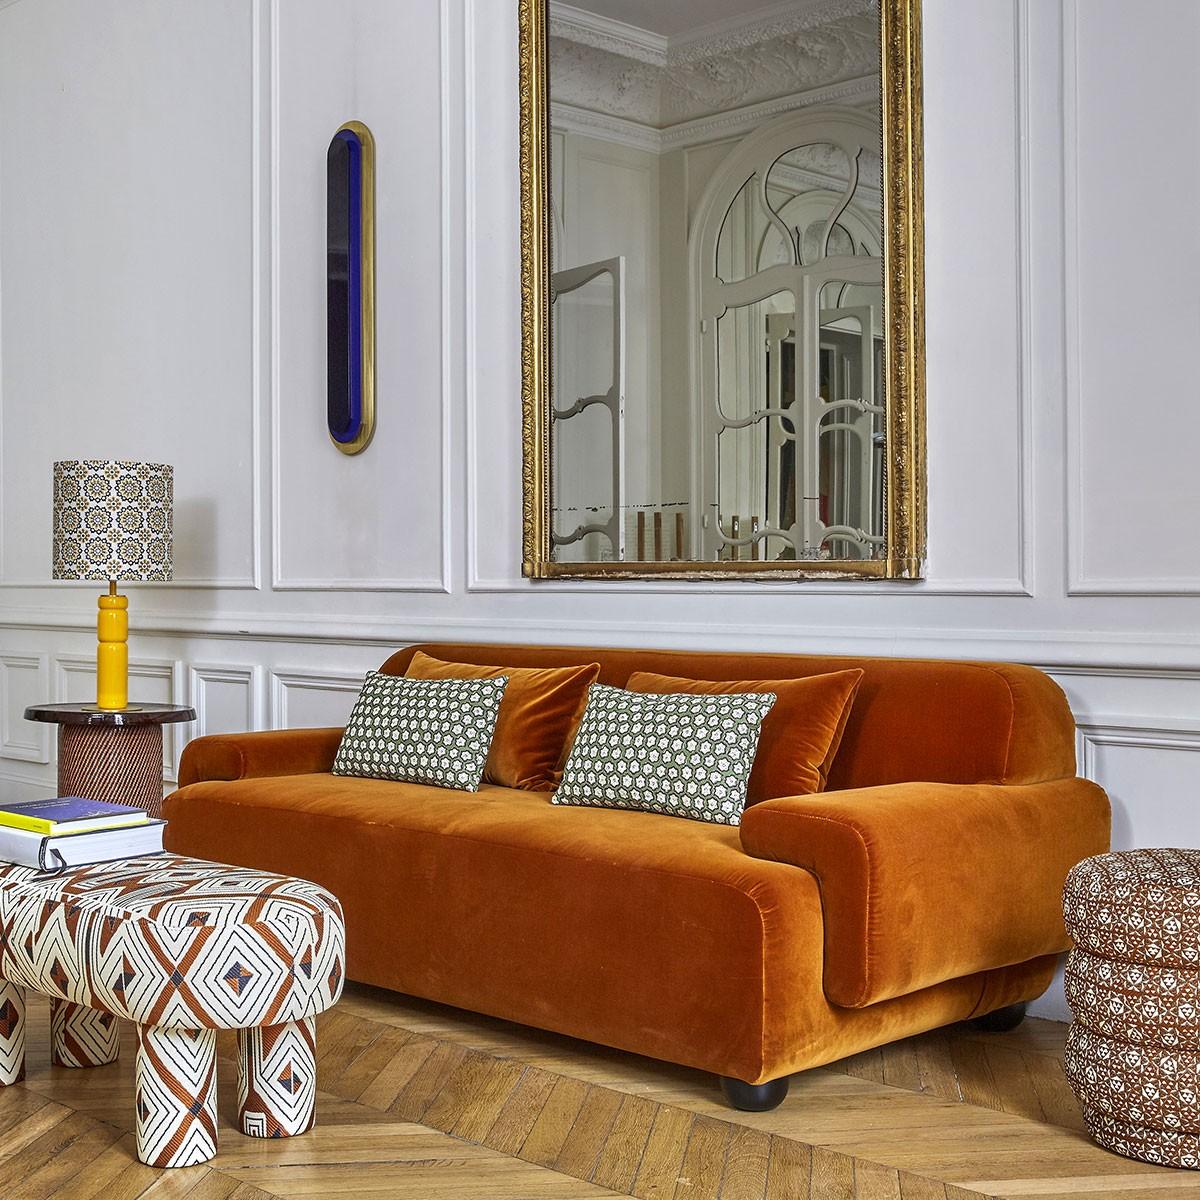 Popus Editions Lena 4-seater sofa in Terracotta London Linen Fabric

It looks like it's straight out of a movie, with its generous curves and wide armrests. It is a real invitation to spend long Sundays with the family, comfortably seated in front